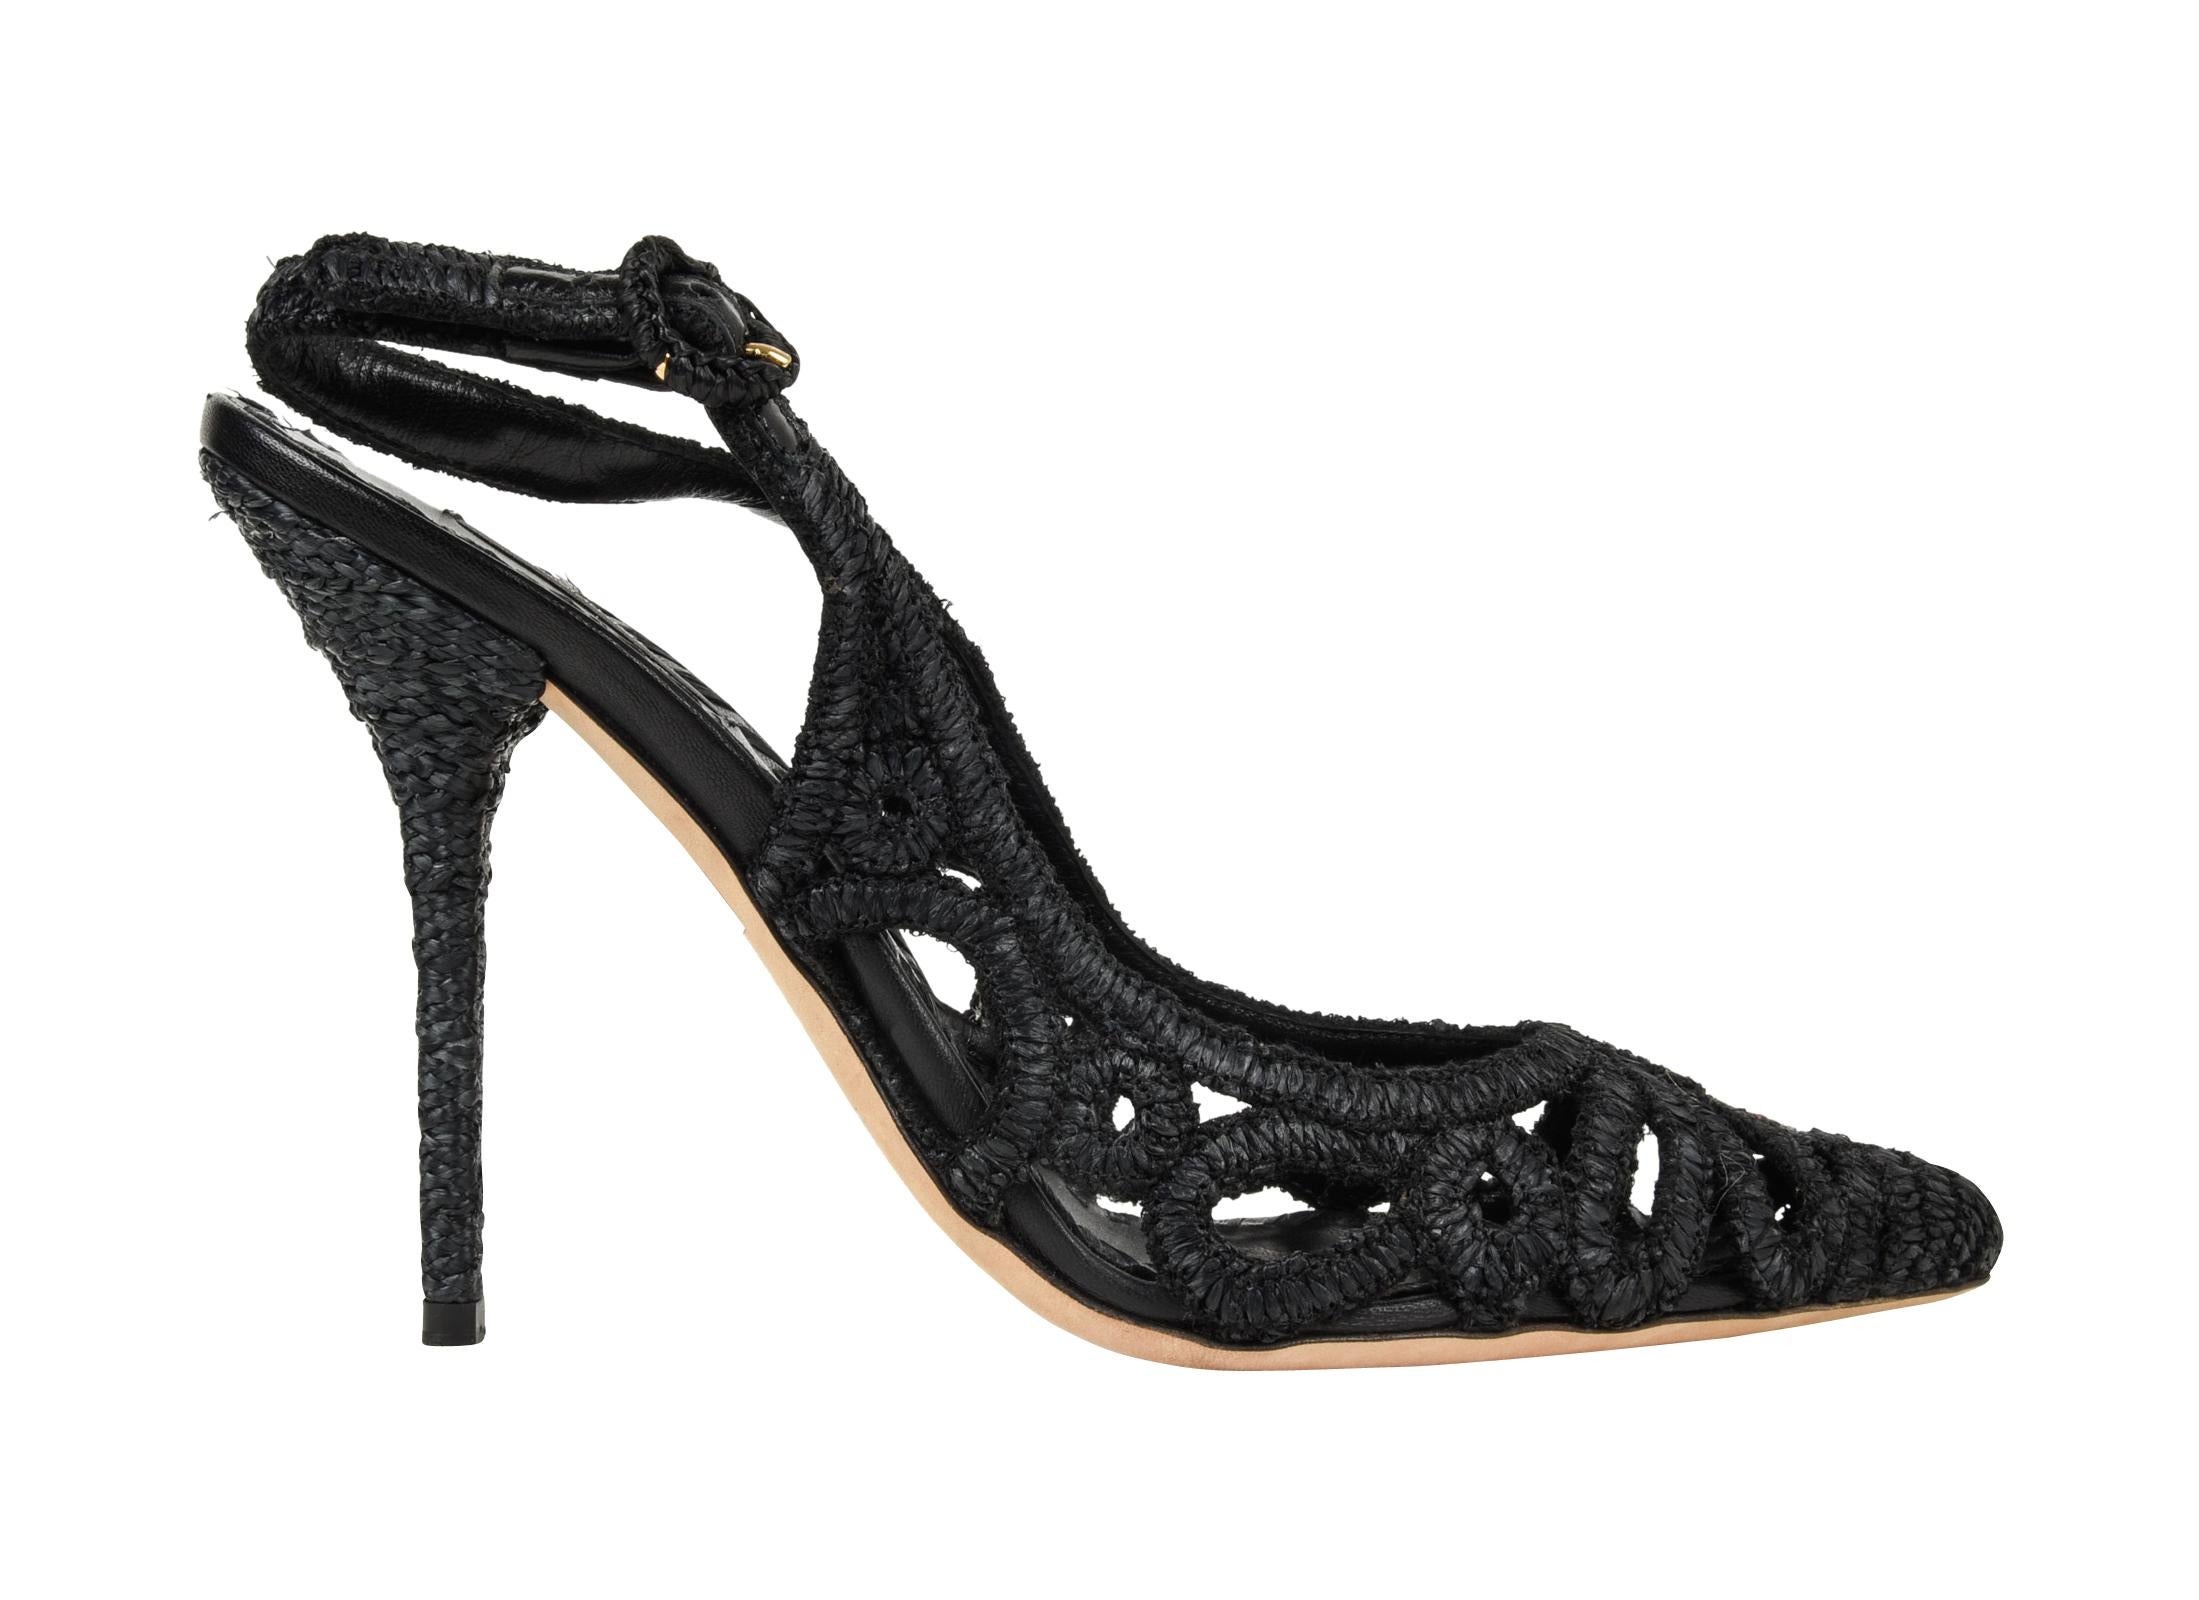 Guaranteed  authentic Dolce&Gabbana black rafia slingback has cutouts with front flower design. 
Stiletto heel is rafia covered.
Divine summer shoe from jeans to pretty dresses.    
final sale
        
SIZE  40
USA SIZE  10  
     
SHOE 